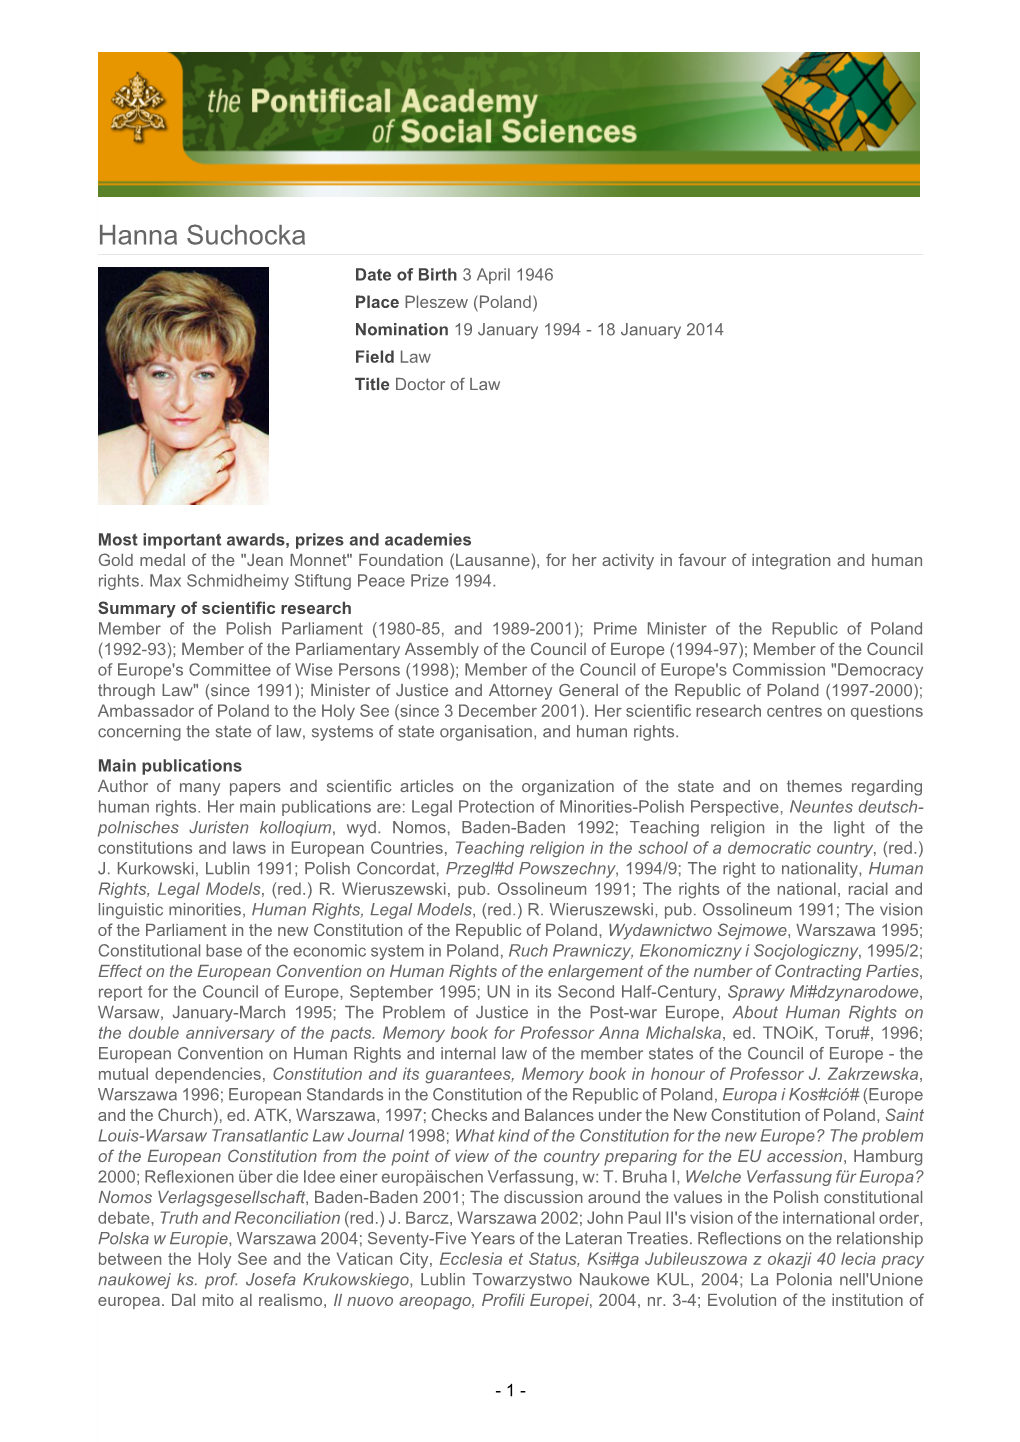 Hanna Suchocka Date of Birth 3 April 1946 Place Pleszew (Poland) Nomination 19 January 1994 - 18 January 2014 Field Law Title Doctor of Law